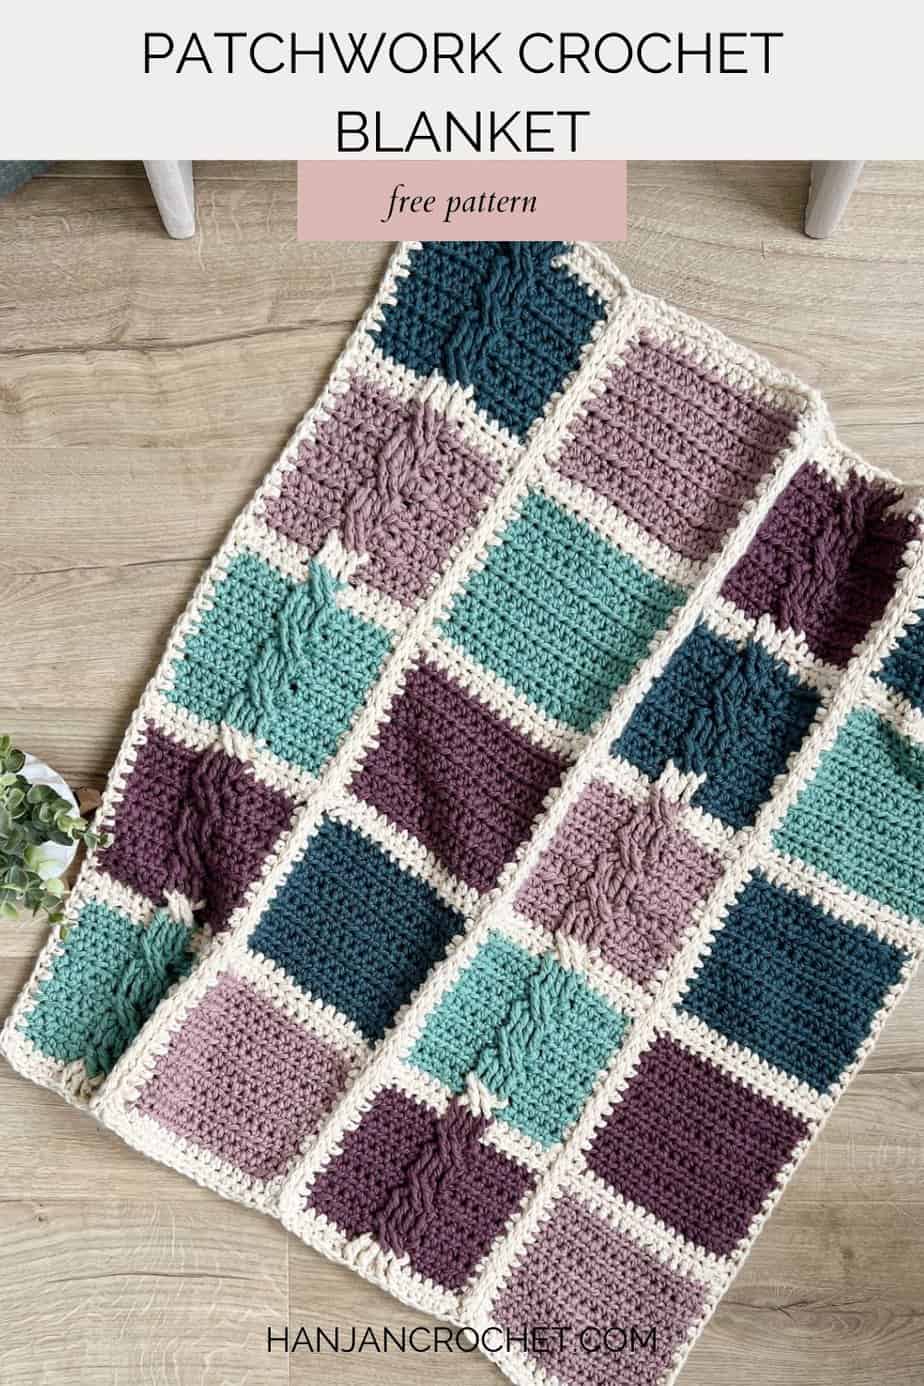 Beginner patchwork crochet pattern in bulky yarn with cable stitch.